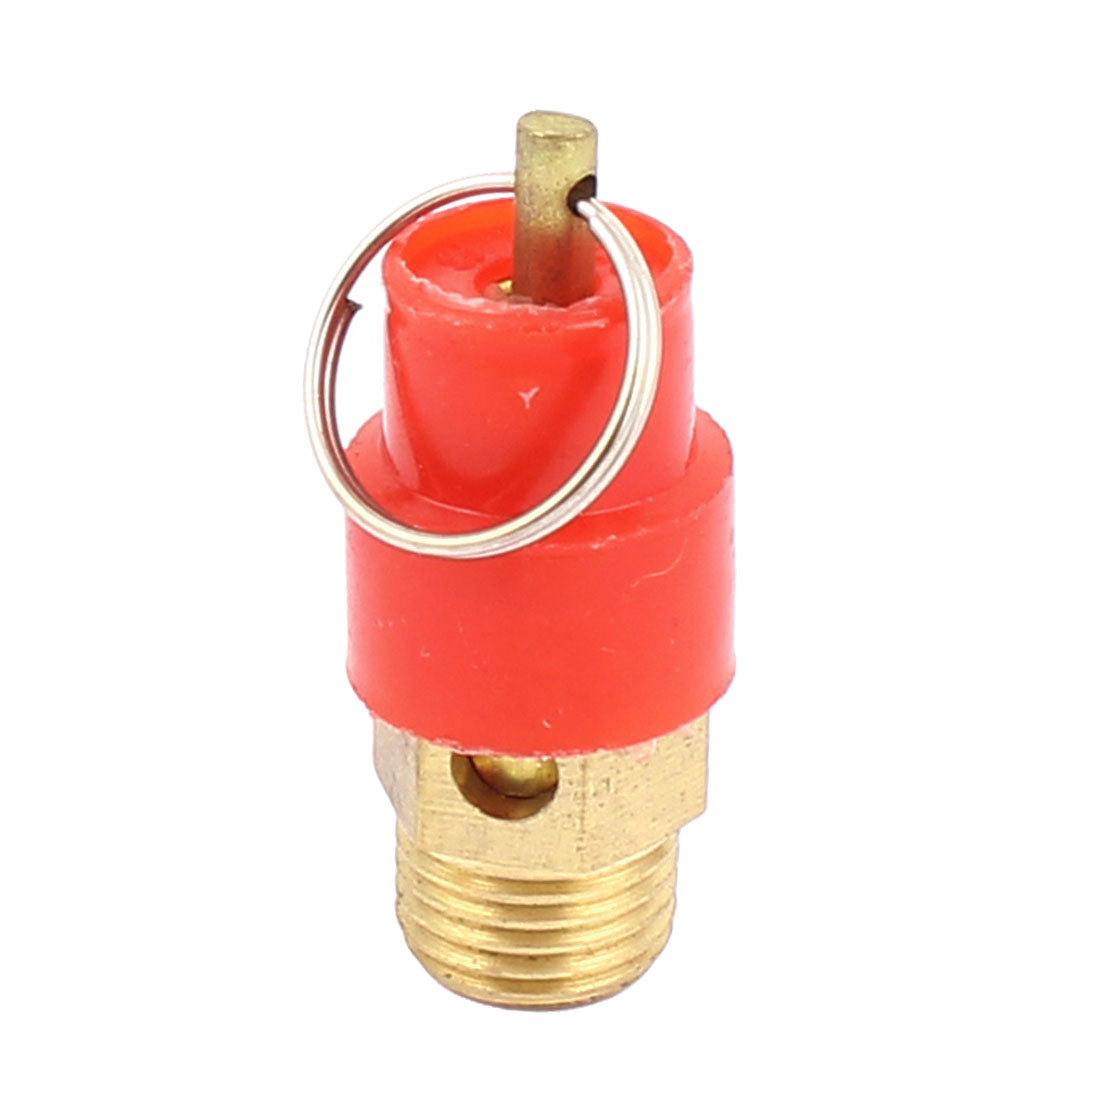 uxcell Uxcell Air Compressor Metal Ring Pressure Relief Safety Valve Release Pneumatic Fitting Control Device 1/4BSP Male Thread